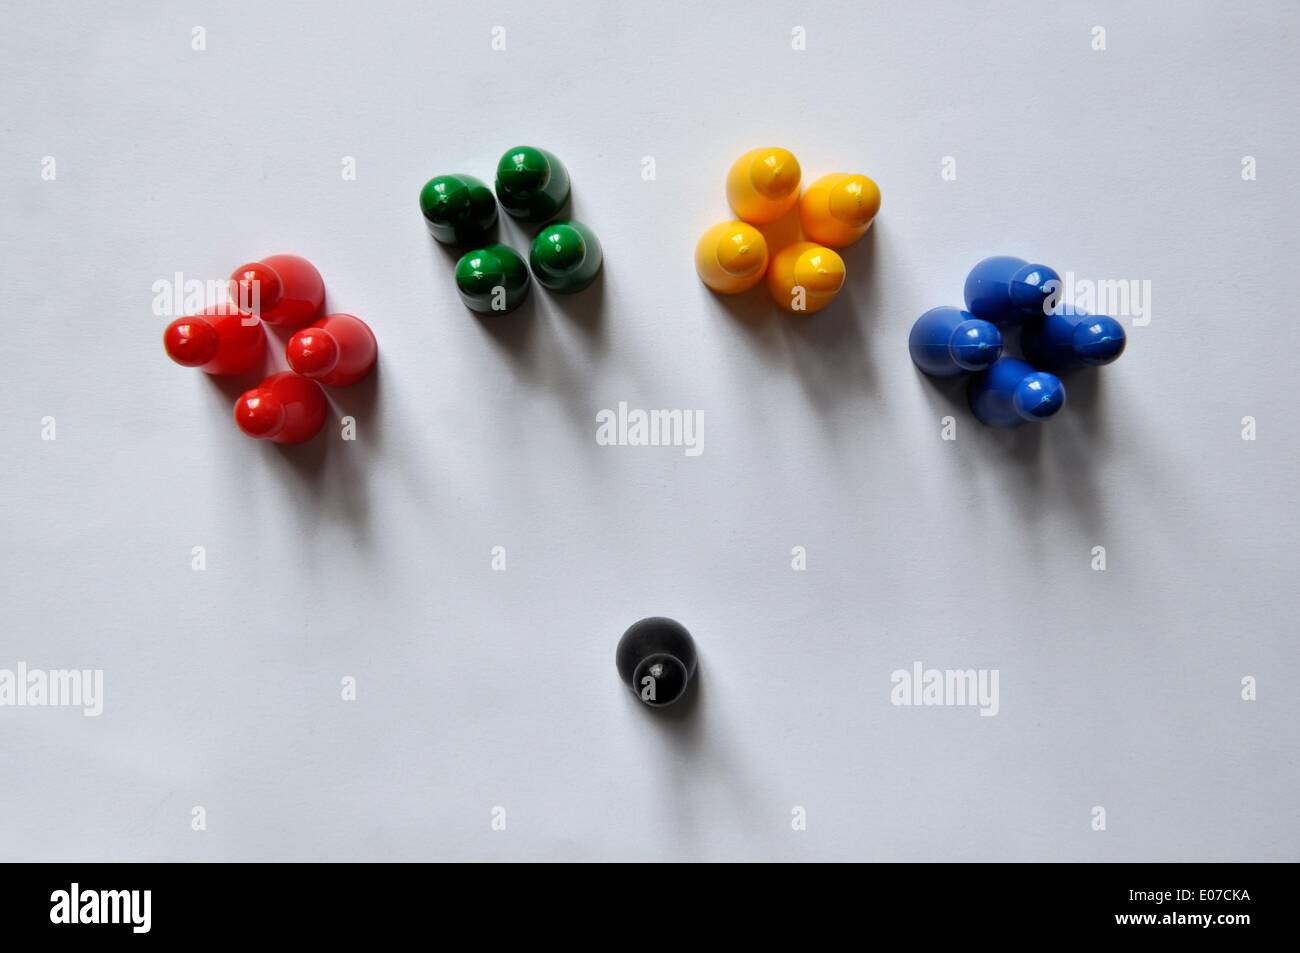 Illustration - Differently coloured groups of game pieces face a black game piece which symbolizes a leader in Germany, 06 October 2010. Fotoarchiv für Zeitgeschichte - NO WIRE SERVICE Stock Photo